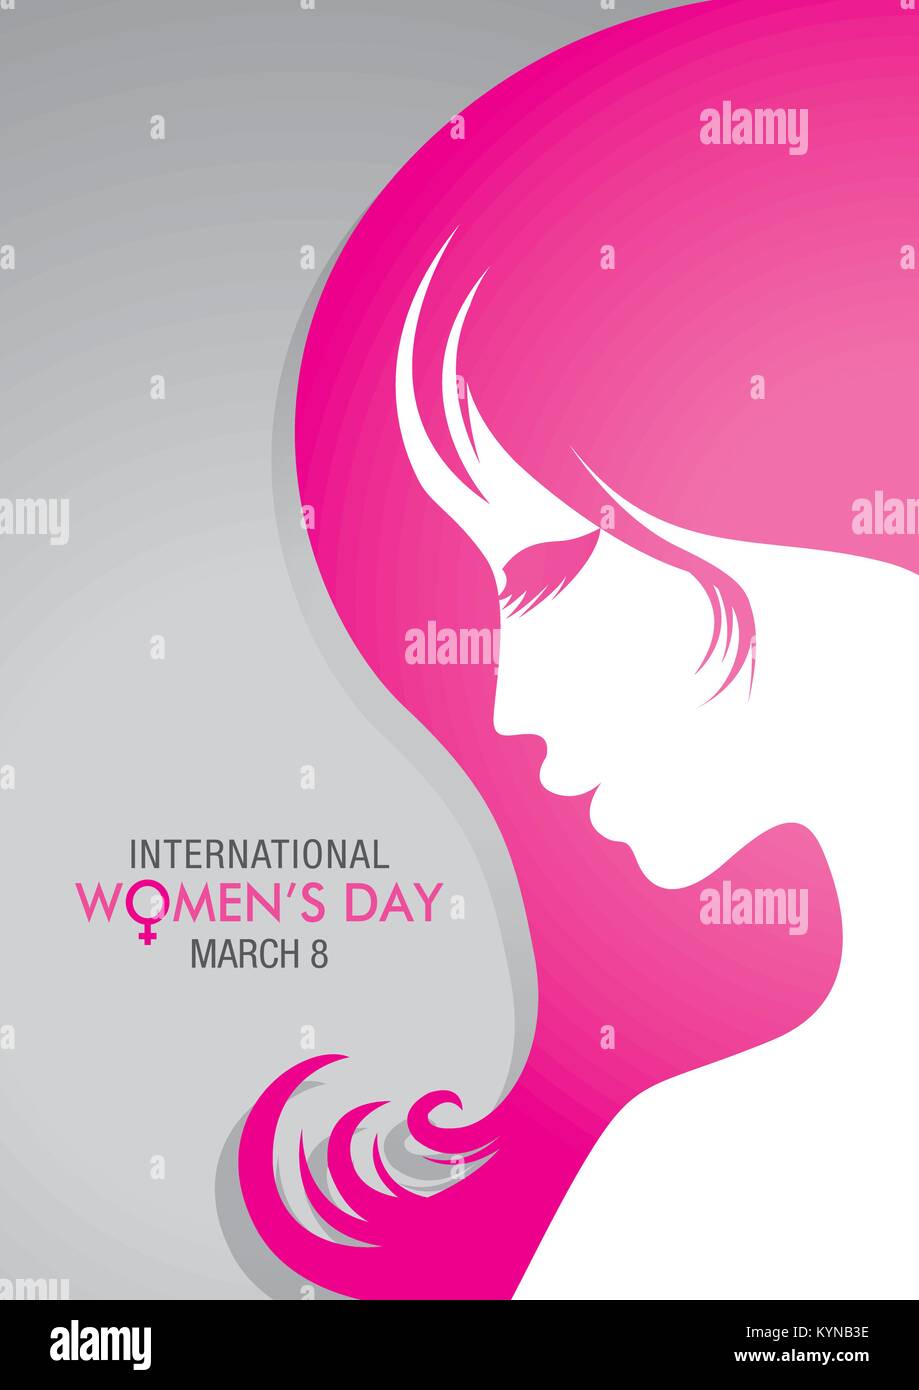 Design About International Women S Day With A Drawing Of A Woman Face Stock Vector Image Art Alamy